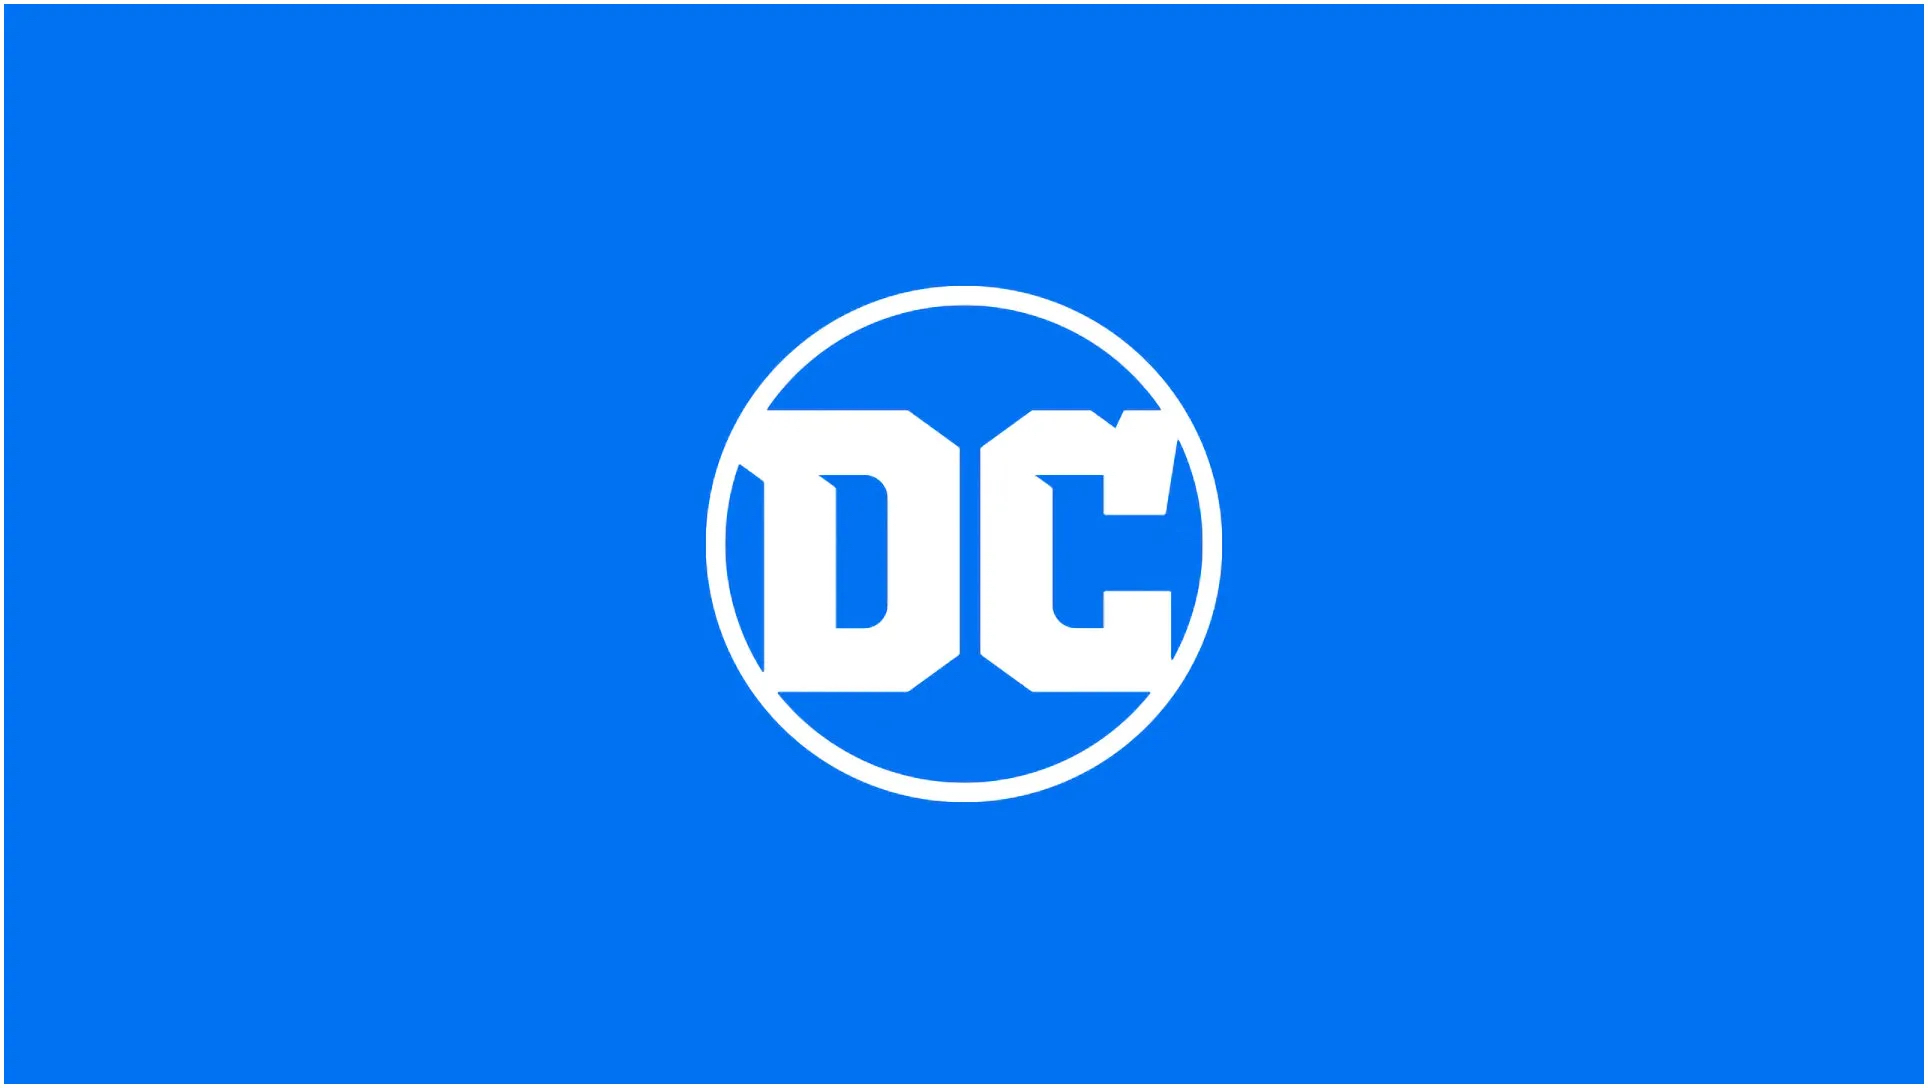 DC announces signings, activities, and merch for SDCC 2023